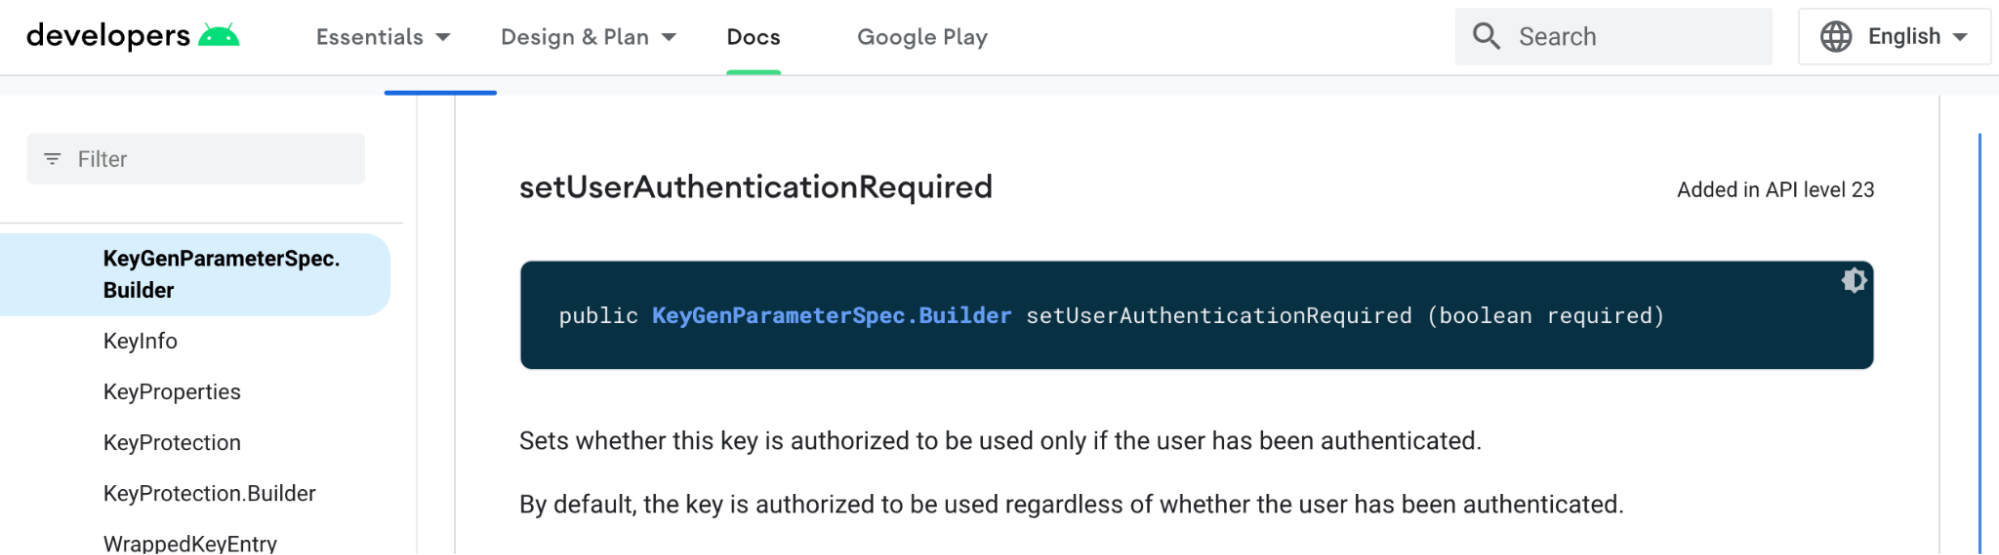 A screenshot of Android Keystore docs for KeyGenerator and UserAuthenticationRequired